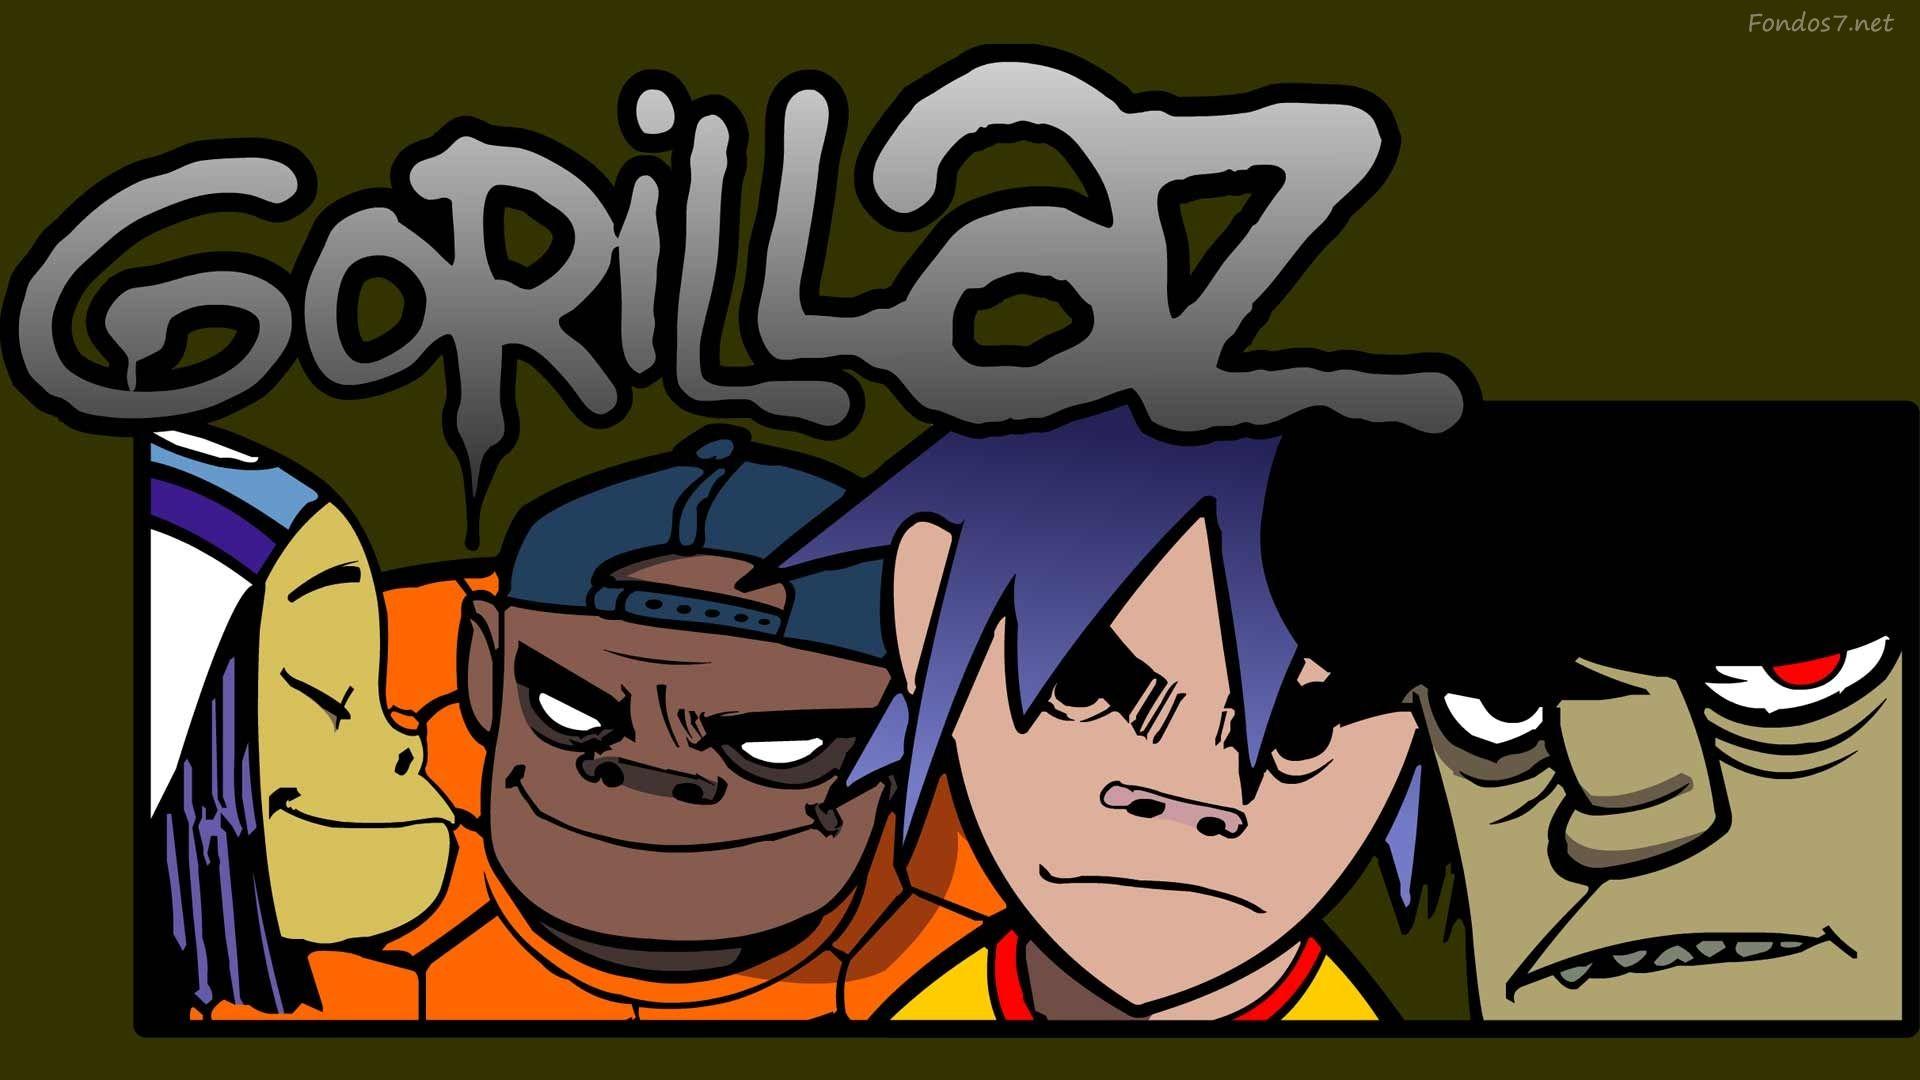 2D Gorillaz HD Wallpapers and Backgrounds